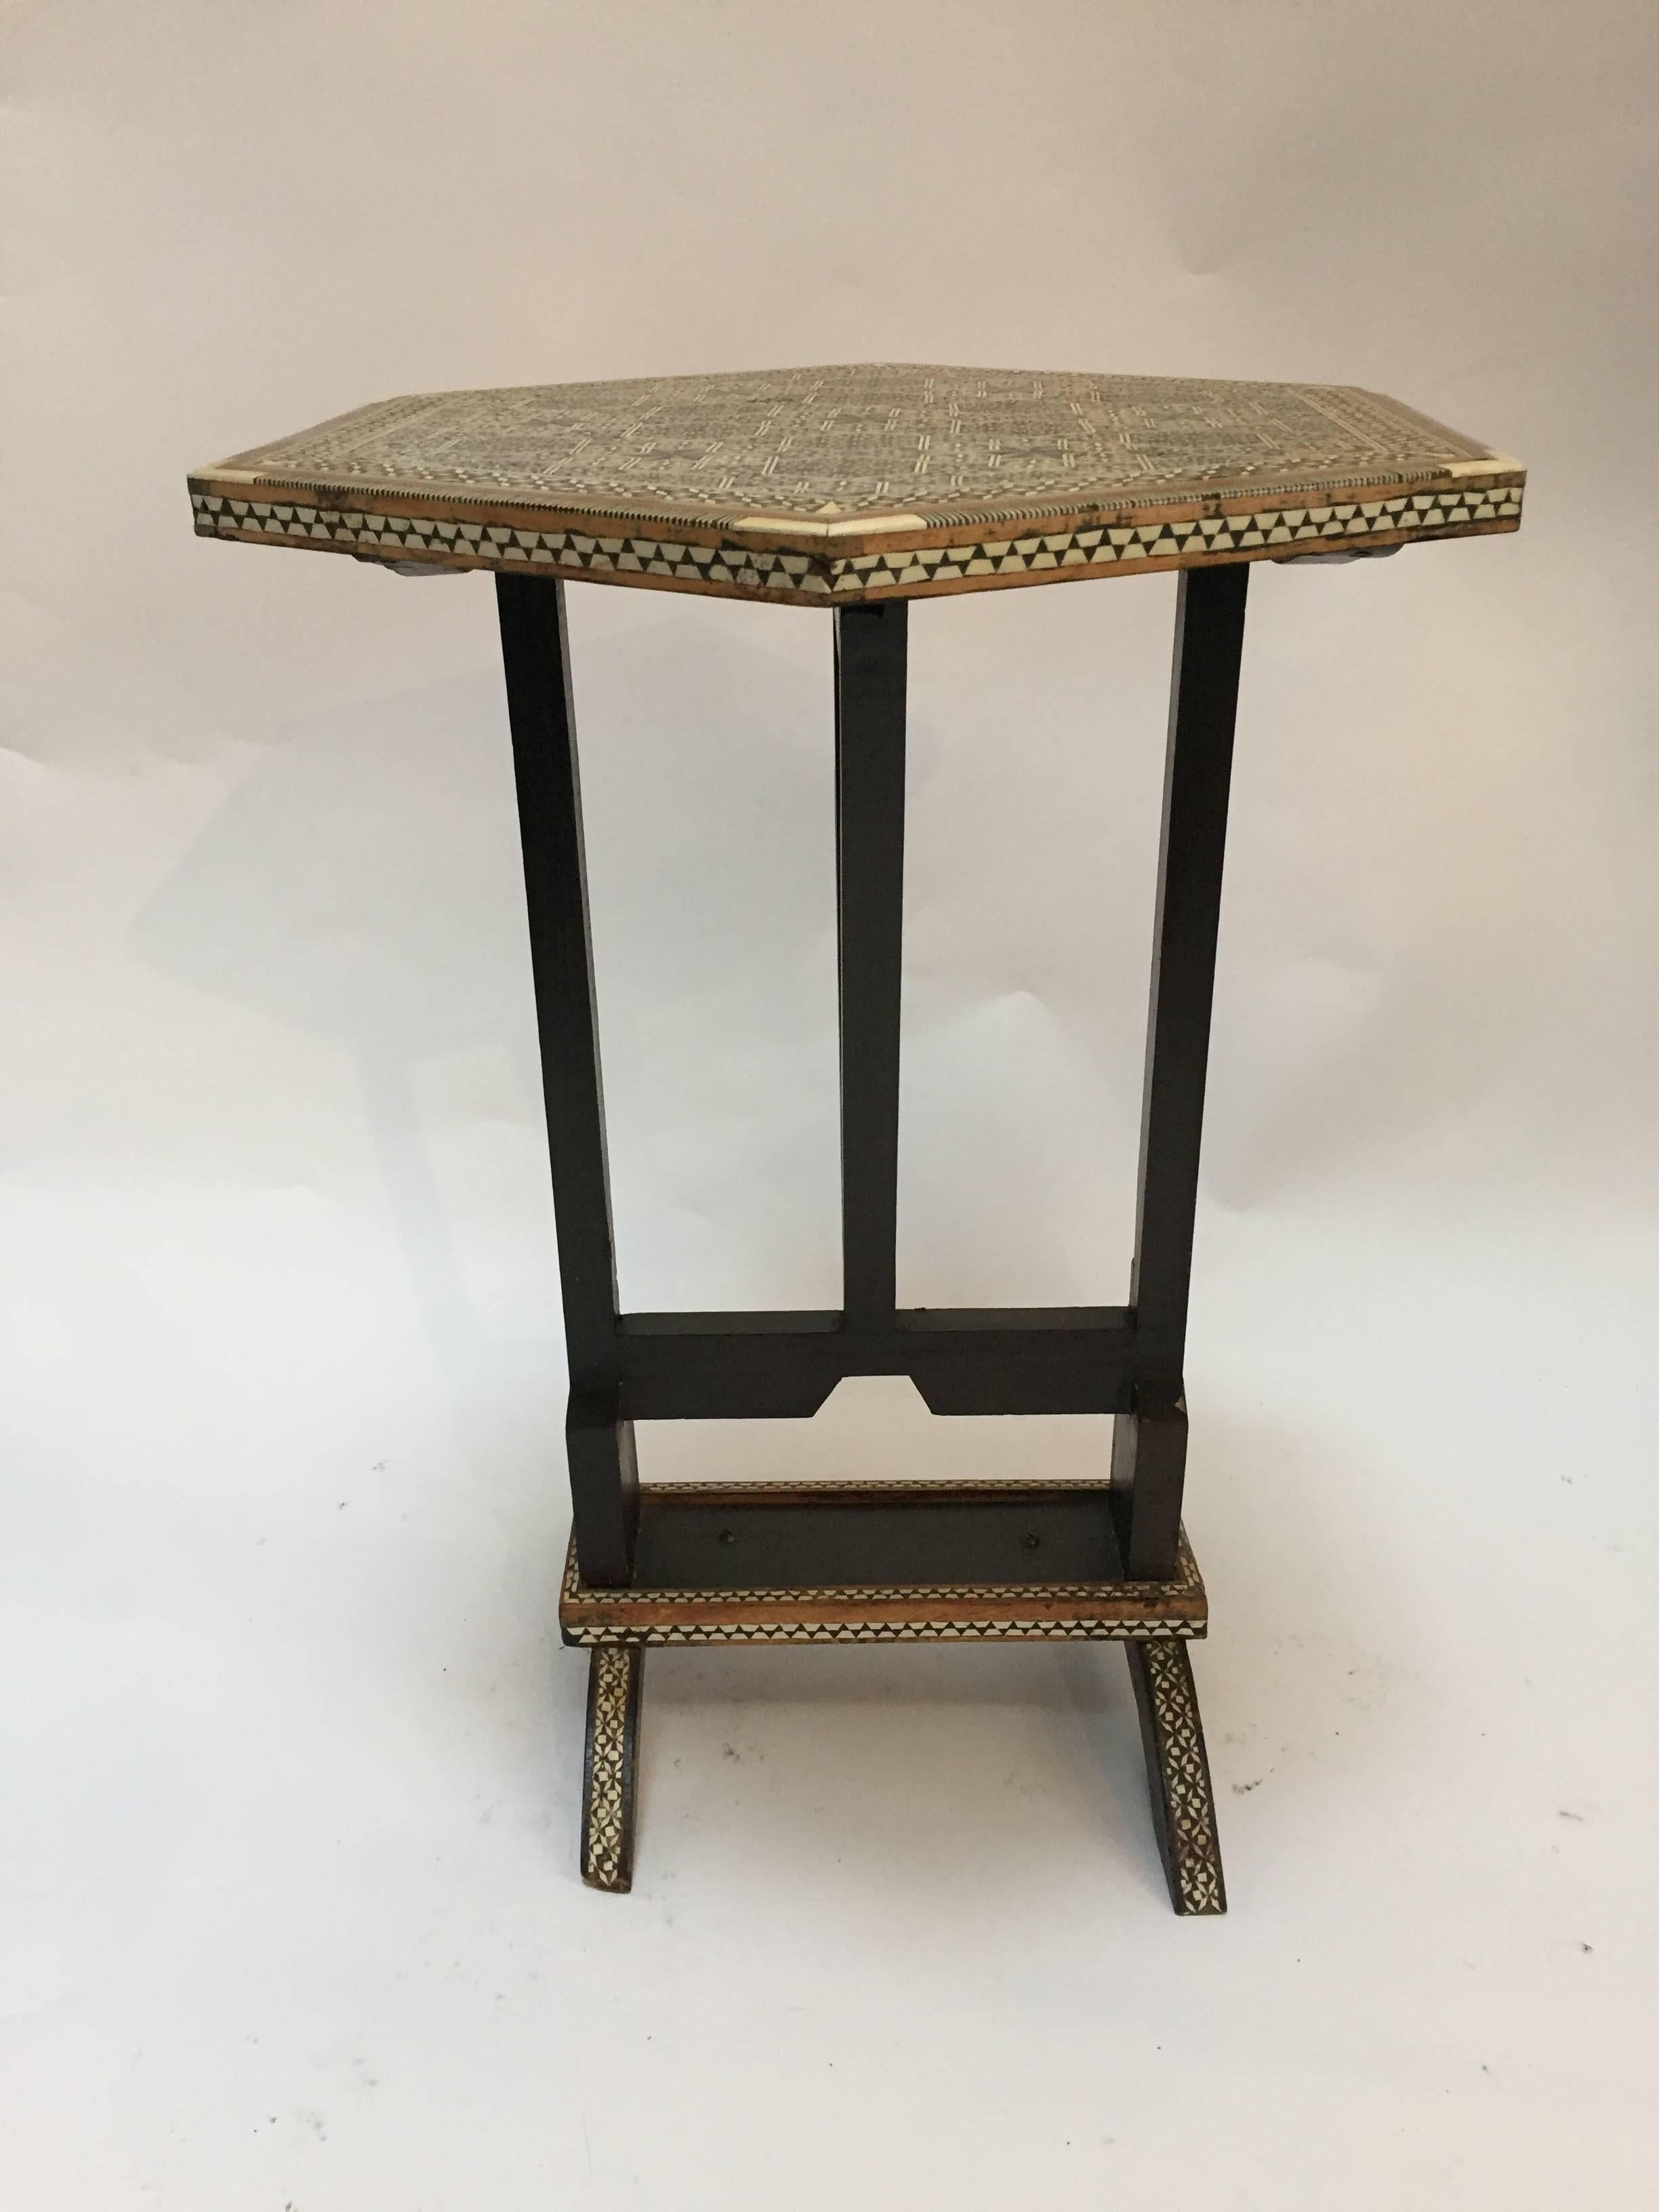 Middle Eastern Egyptian octagonal side table with marquetry inlaid and mother-of-pearl. 
Tilt-top table with Moorish Syrian intricate geometric designs.
Handcrafted by skilled artisans in Egypt.
